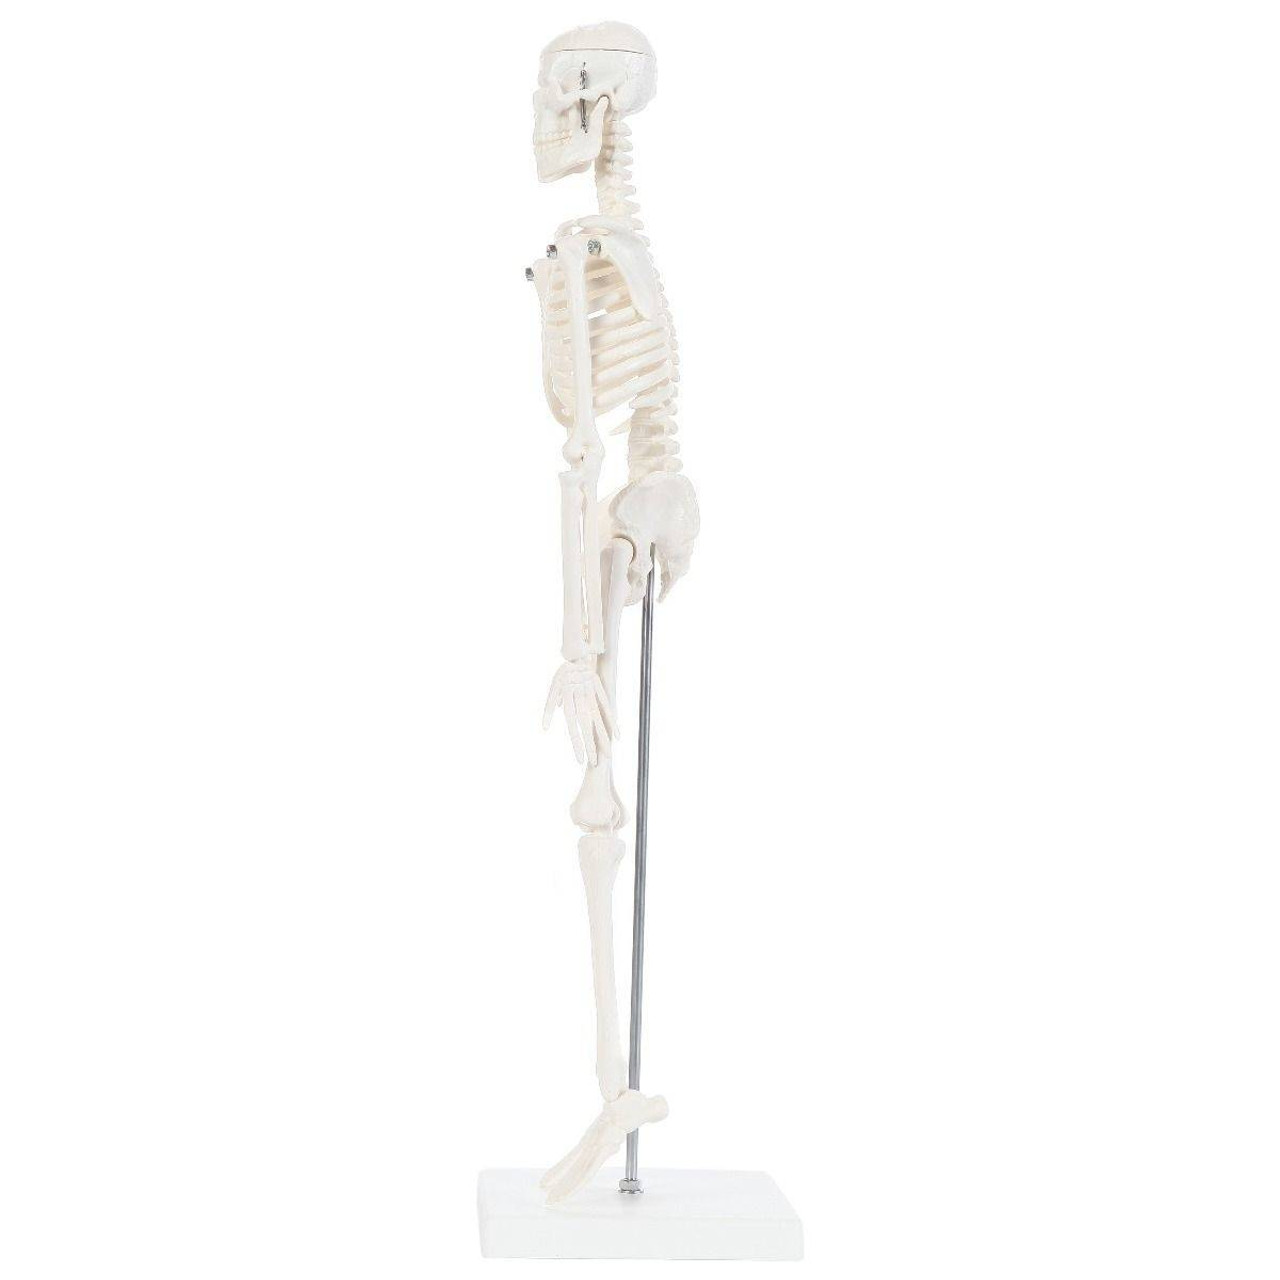 with Basic Details of Human Skeletal System Anatomy Lab Micro Human Skeleton Model 19 Mini Skeleton Has Movable Arms and Legs 